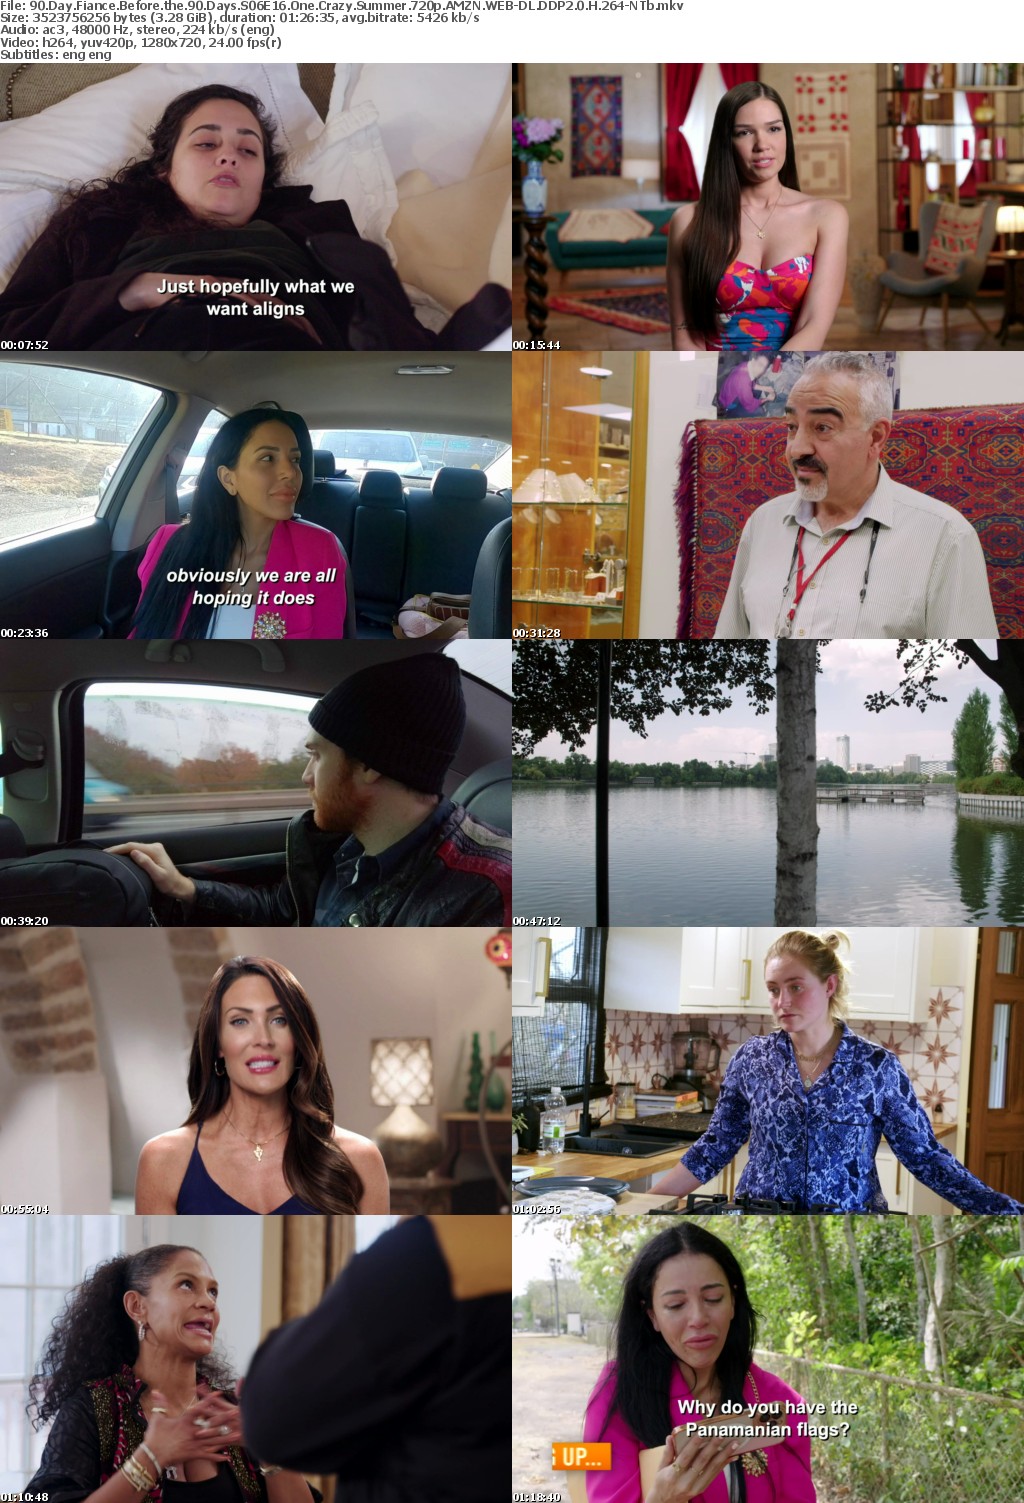 90 Day Fiance Before the 90 Days S06E16 One Crazy Summer 720p AMZN WEB-DL DDP2 0 H 264-NTb